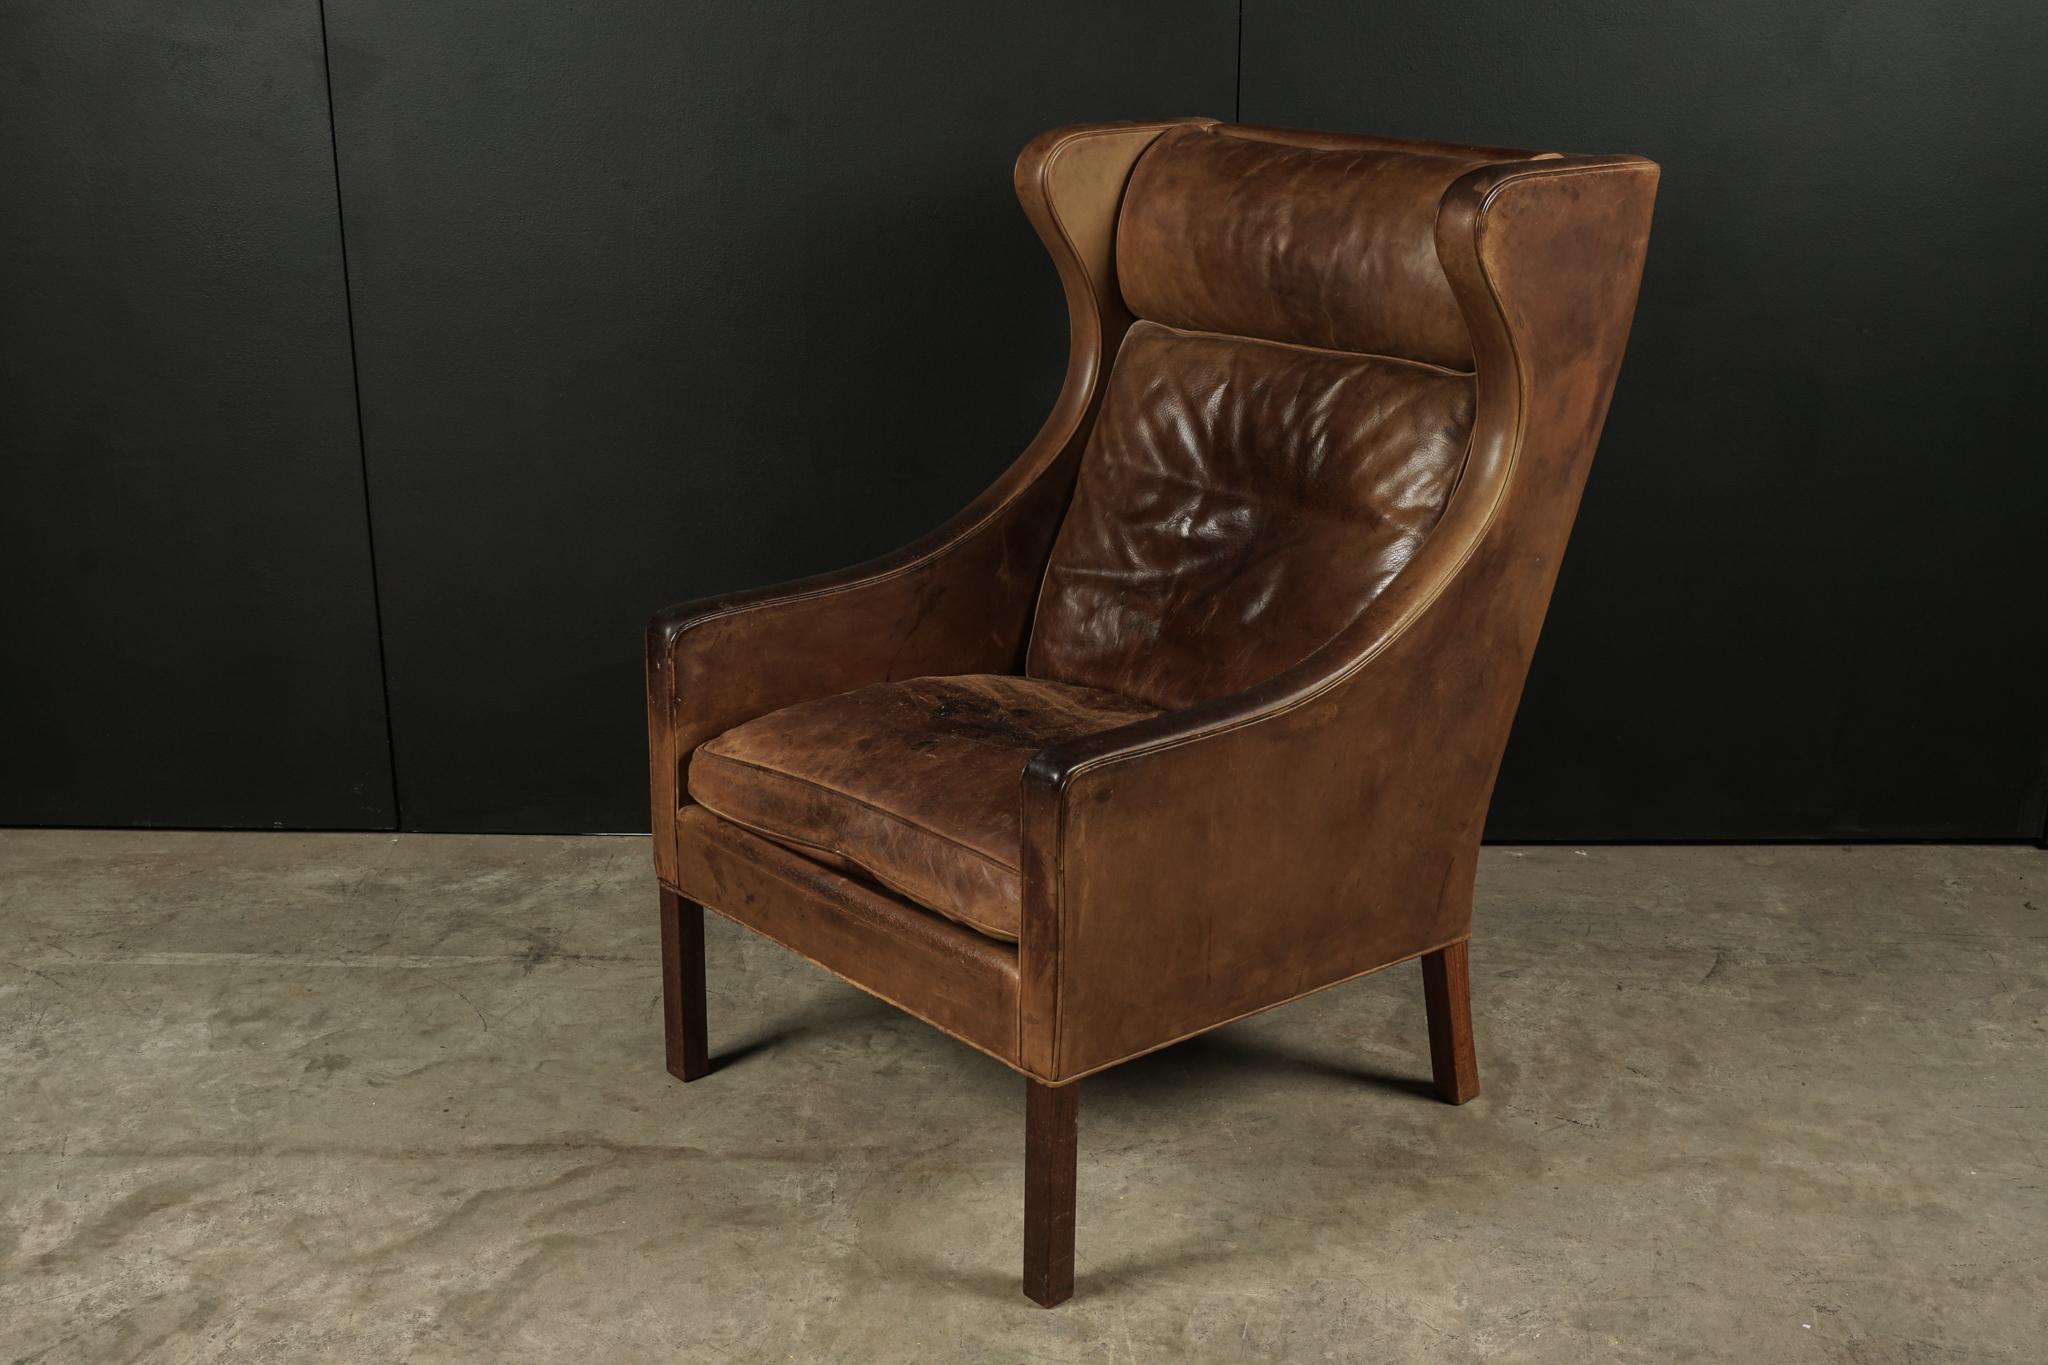 Leather wingback chair designed by Borge Mogensen, Model 2204. Fantastic patina and wear on leather. Manufactured by Fredericia Stolefabrik, Denmark.